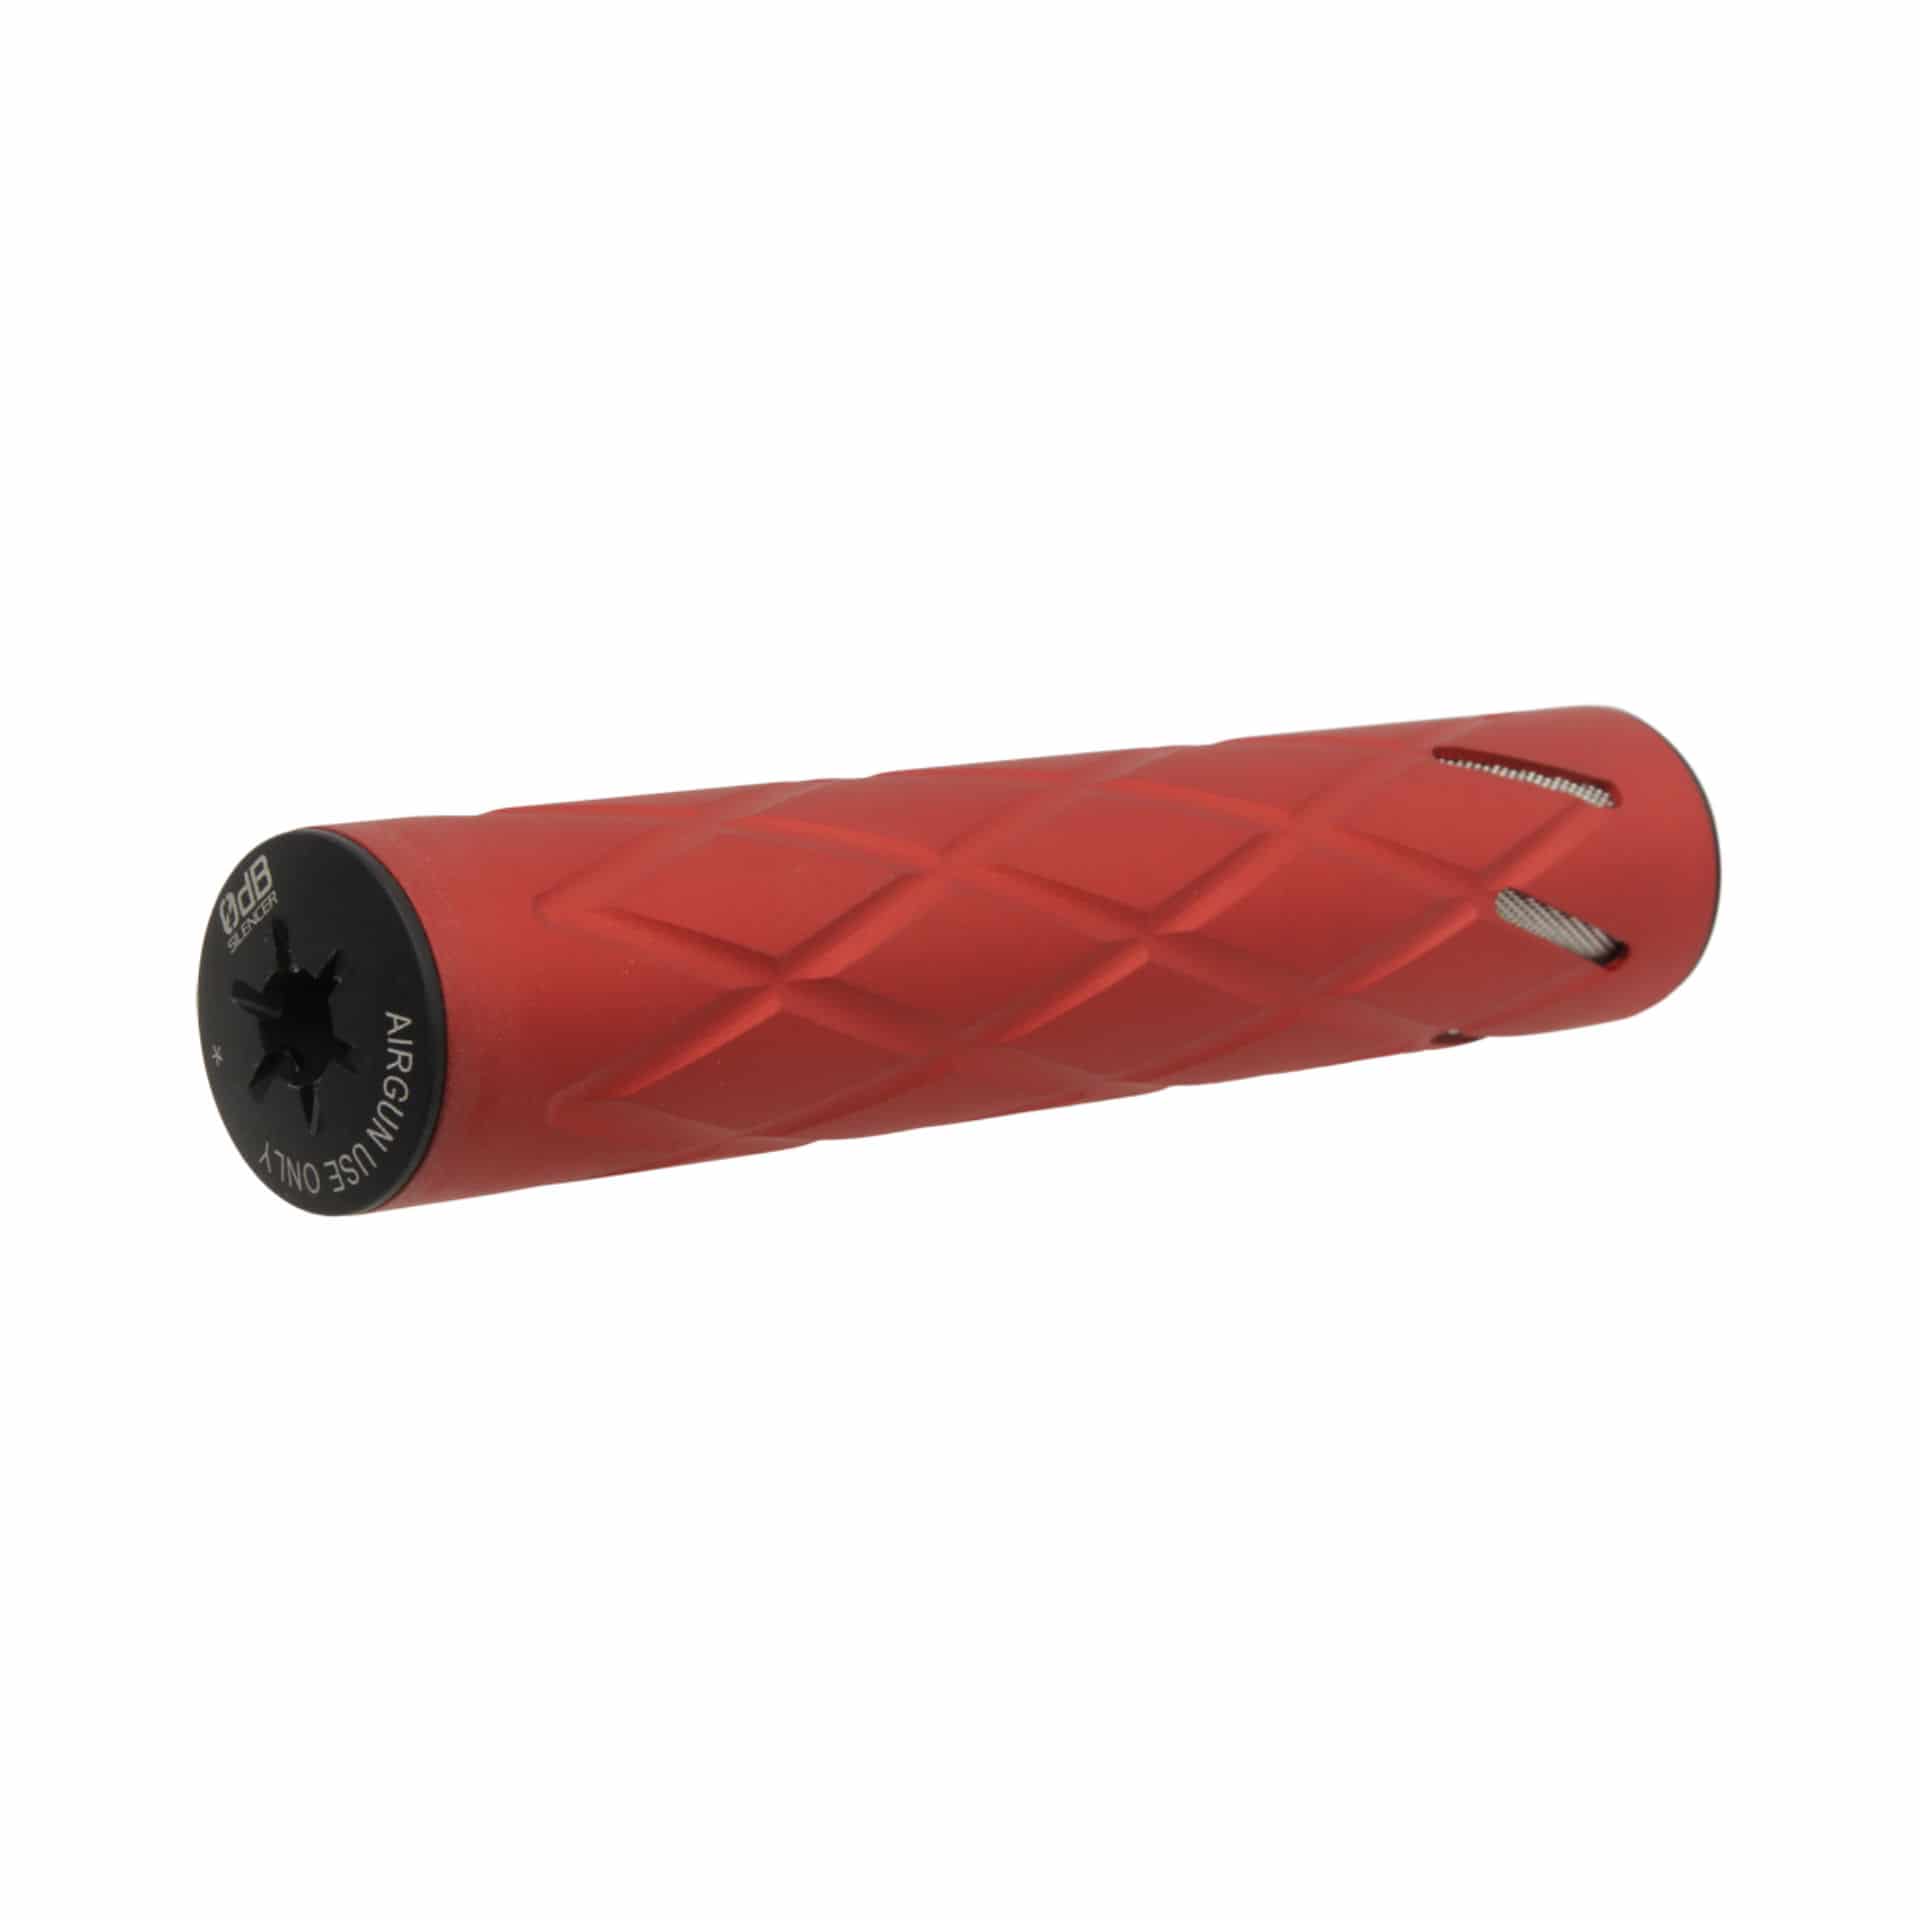 Silencer 0dB - 160s red